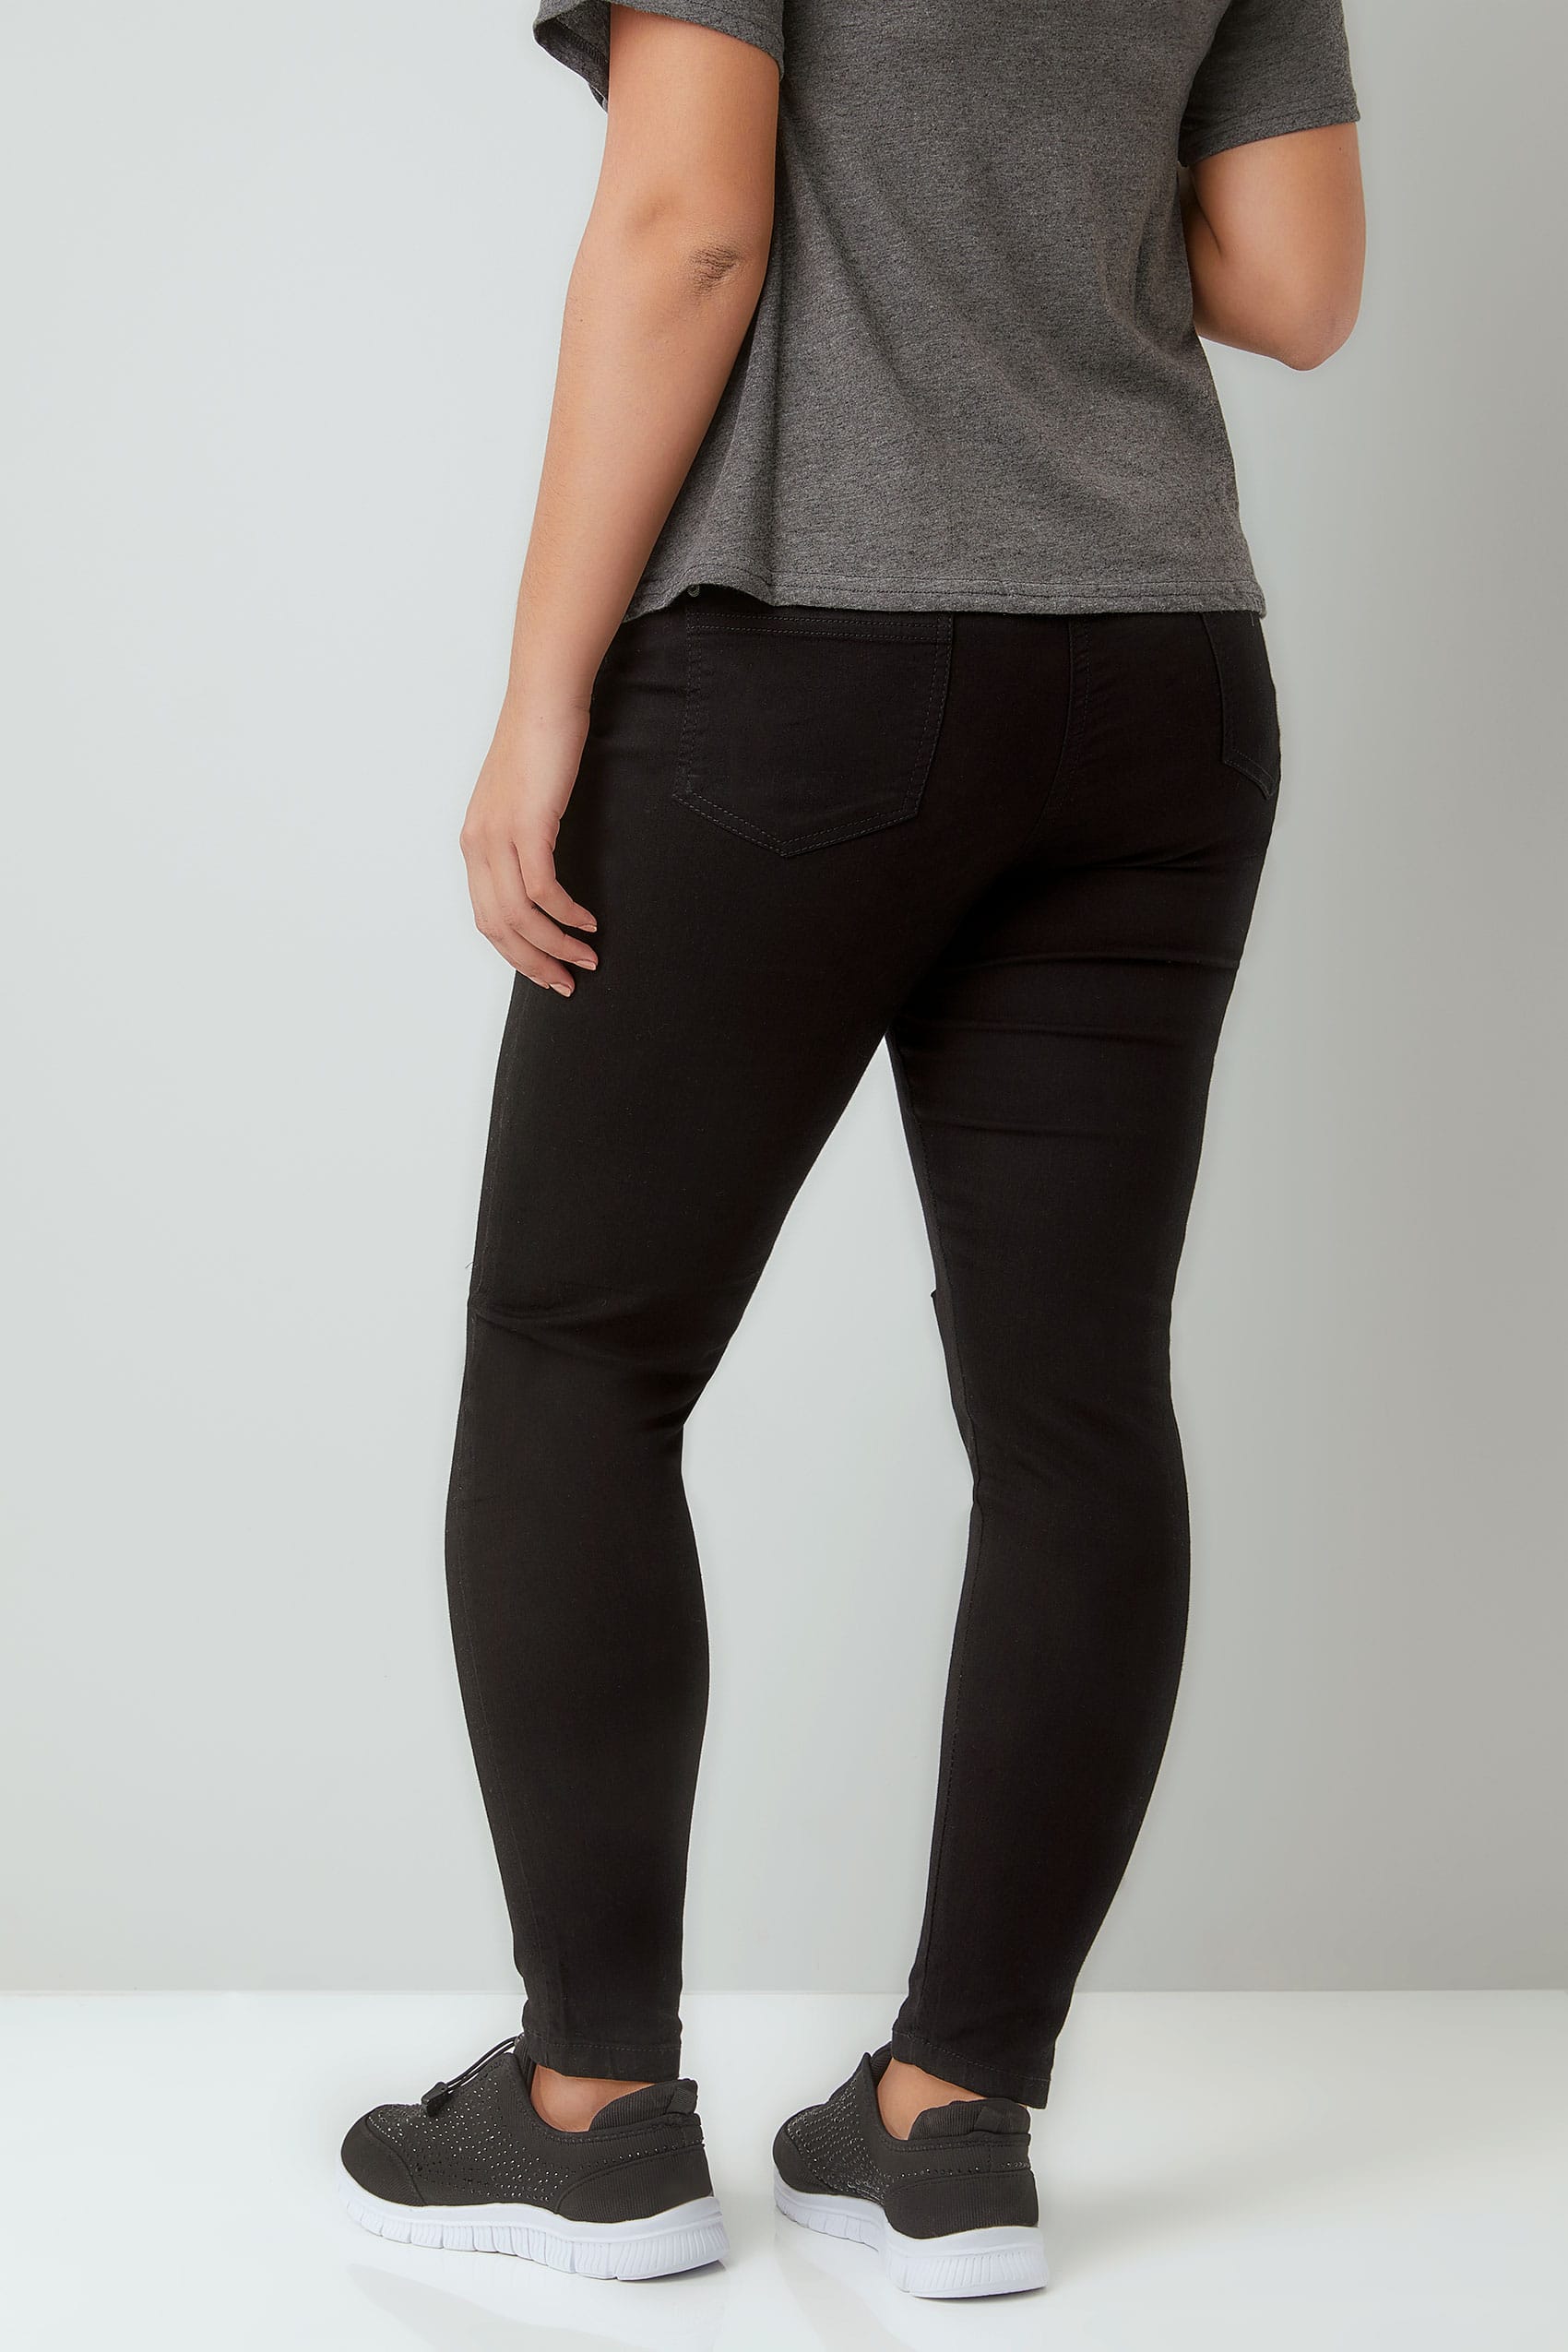 Black Super Stretch Skinny Jeans With Ripped Knees, Plus size 16 to 301700 x 2550